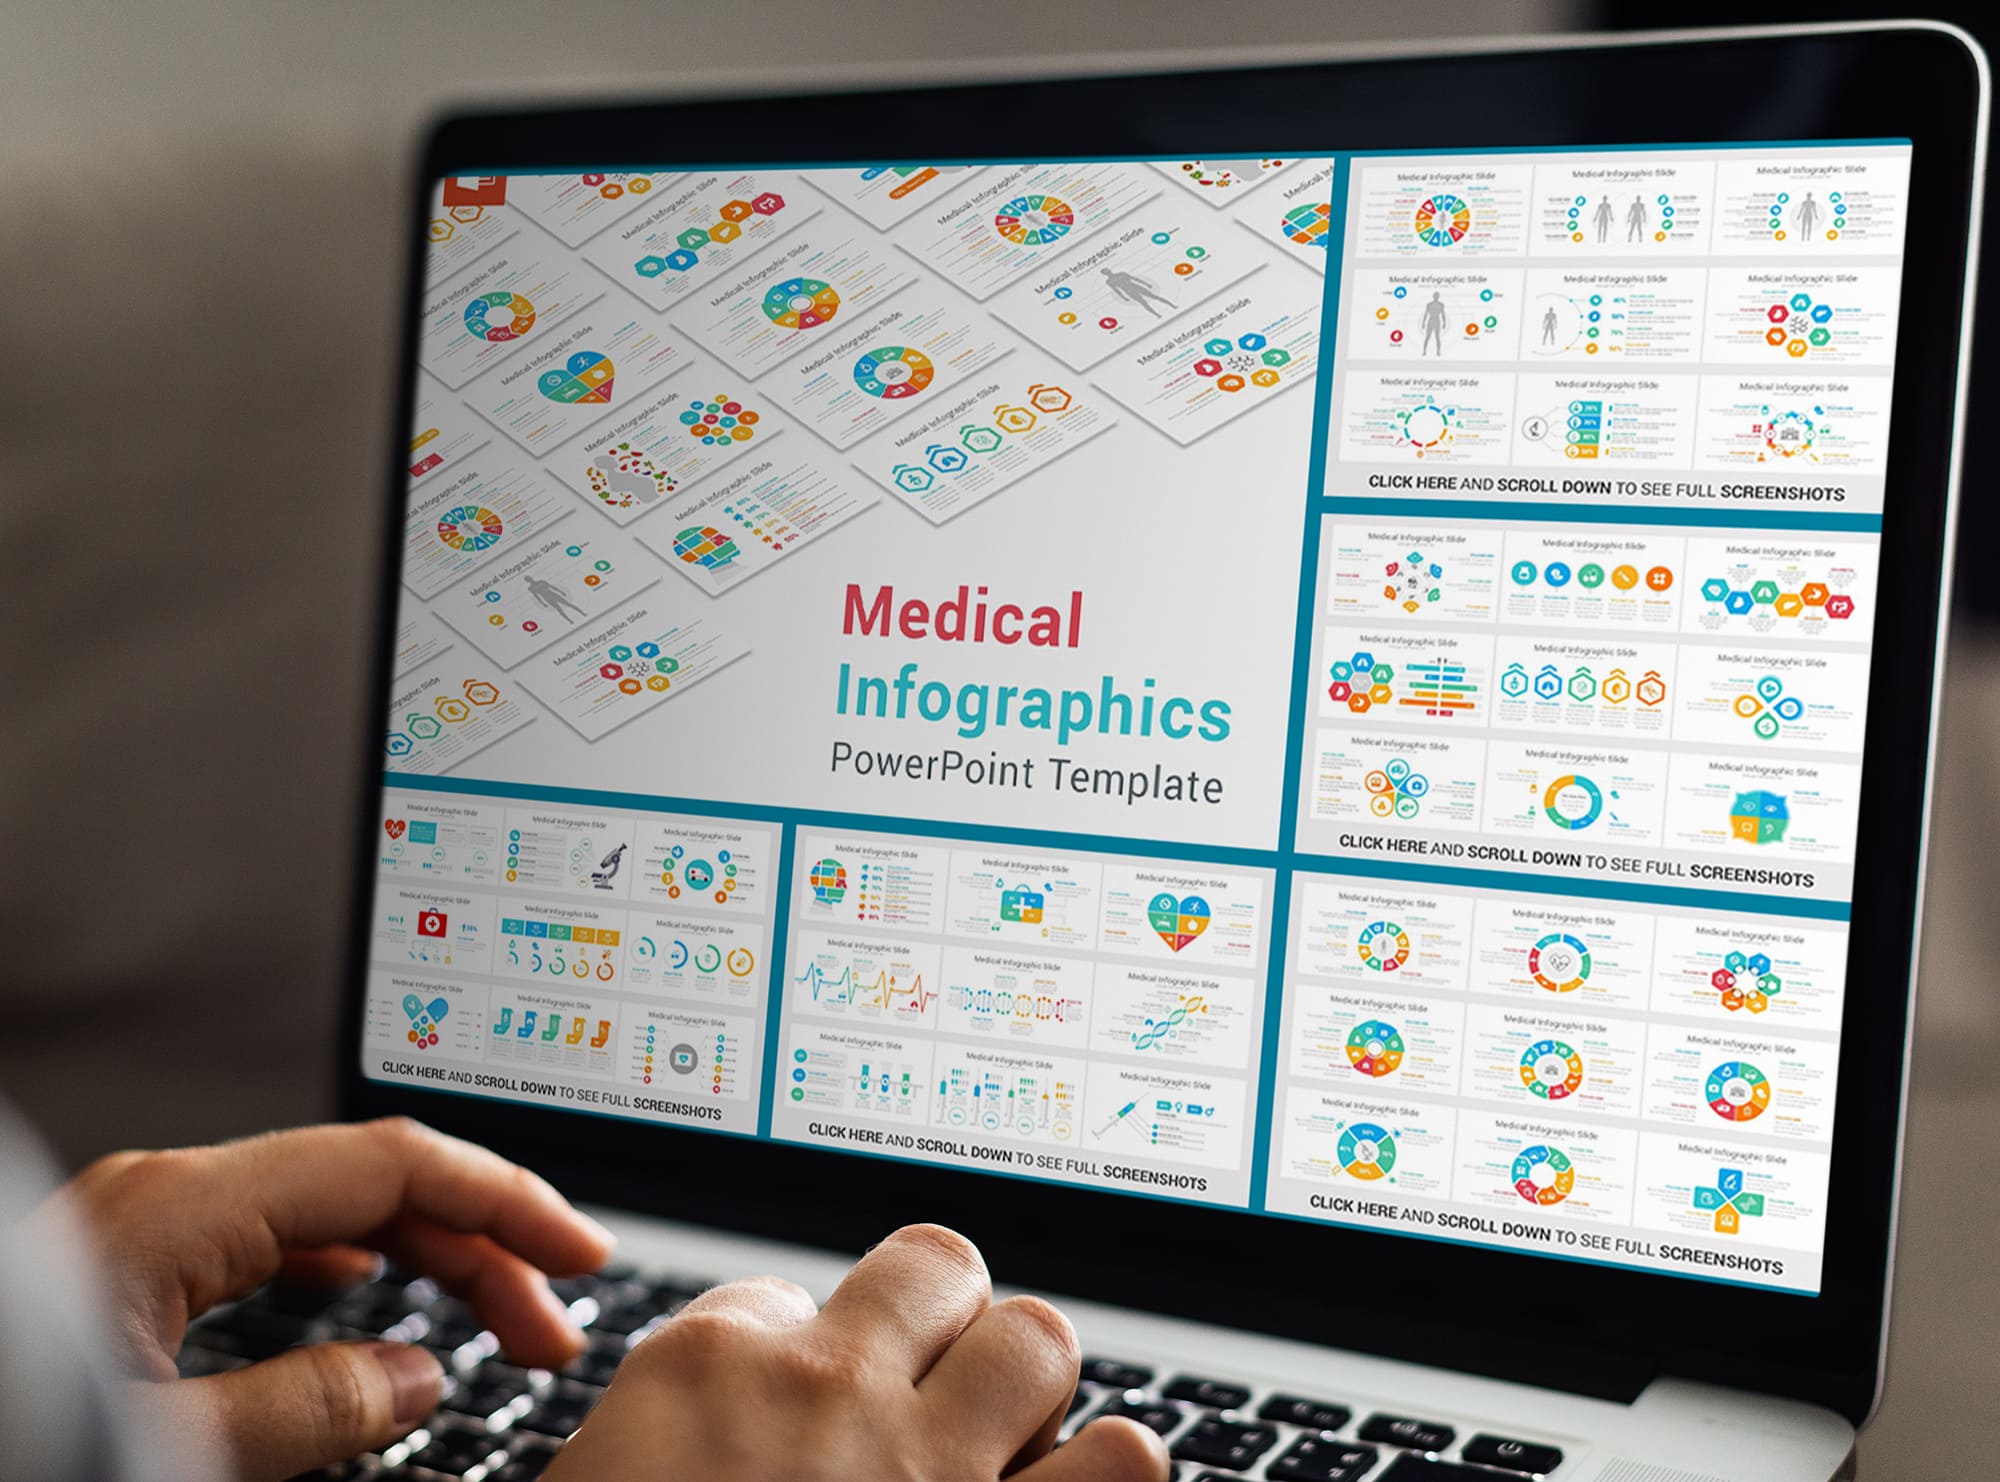 Laptop option of the Medical Infographics PowerPoint.